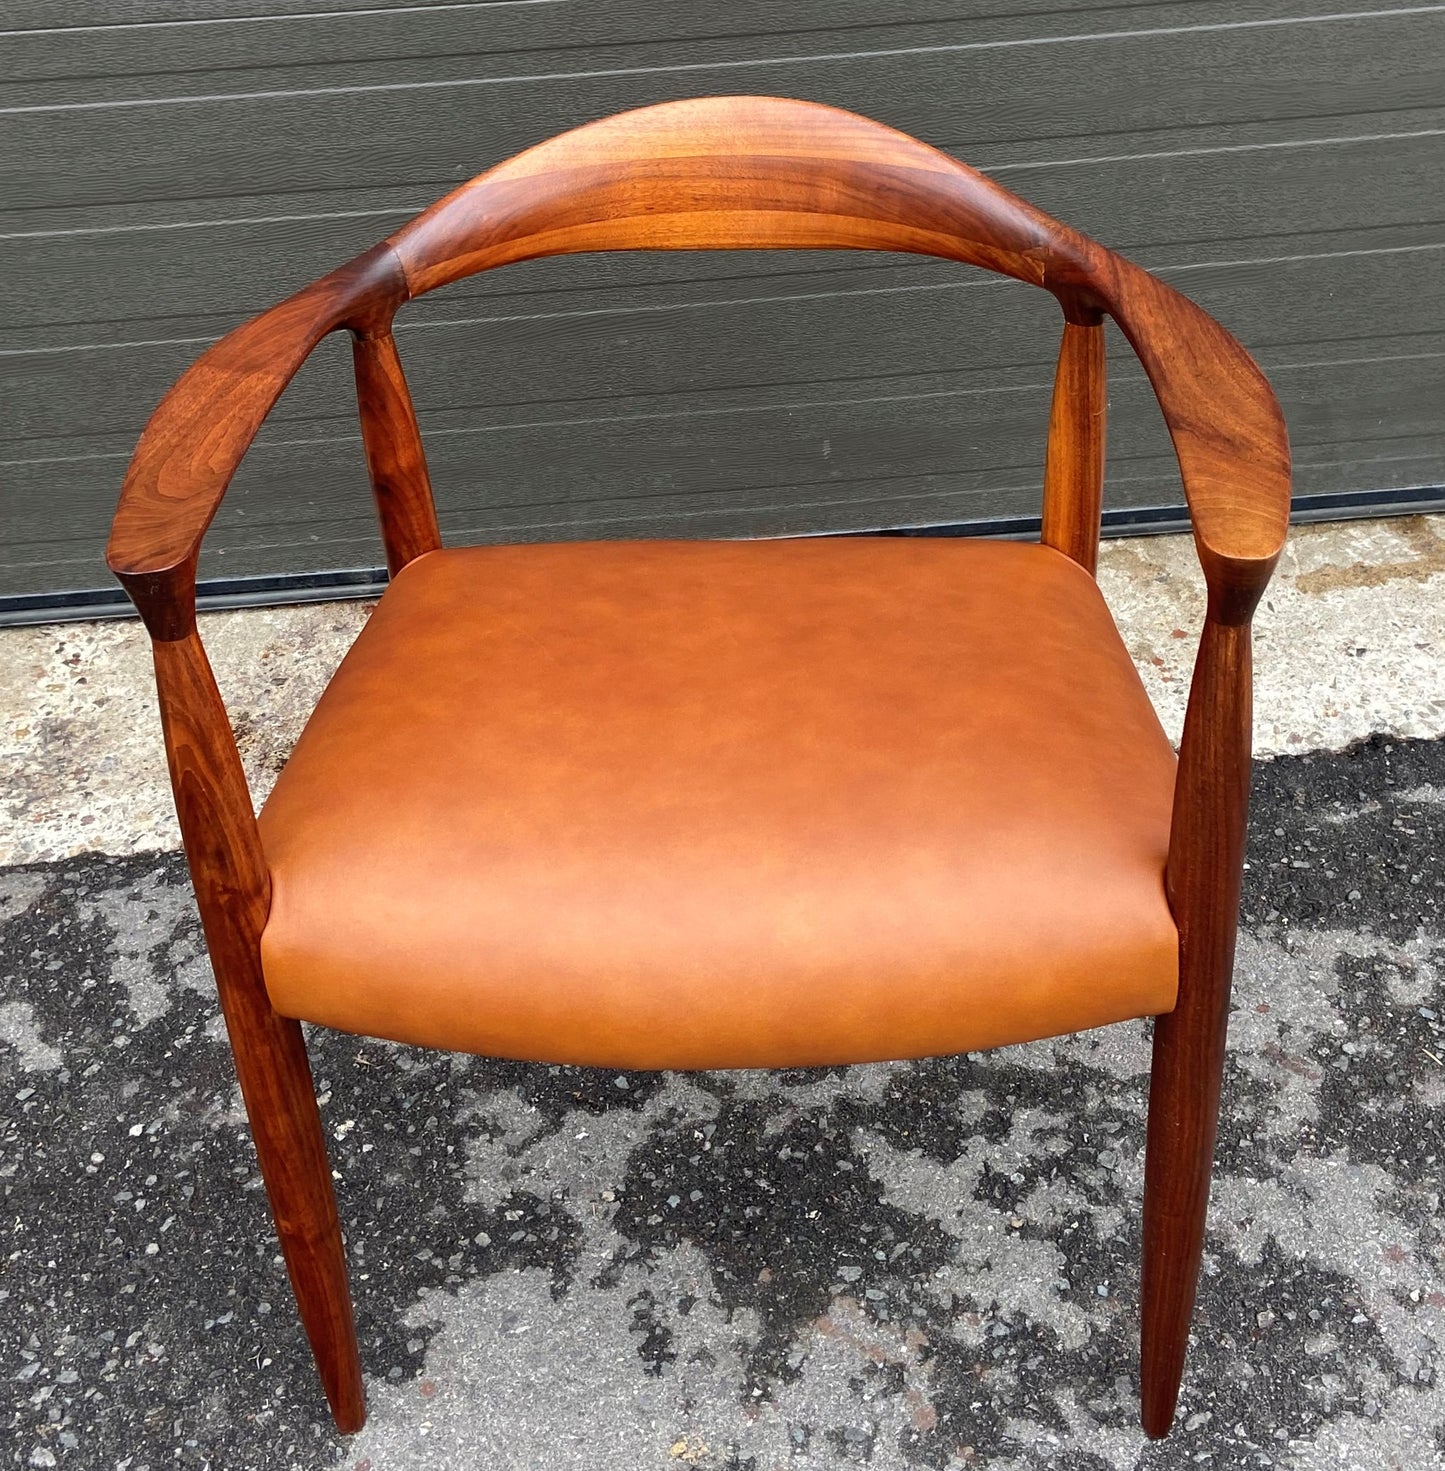 REFINISHED REUPHOLSTERED in Leather Danish Mid Century Modern Teak Armchair